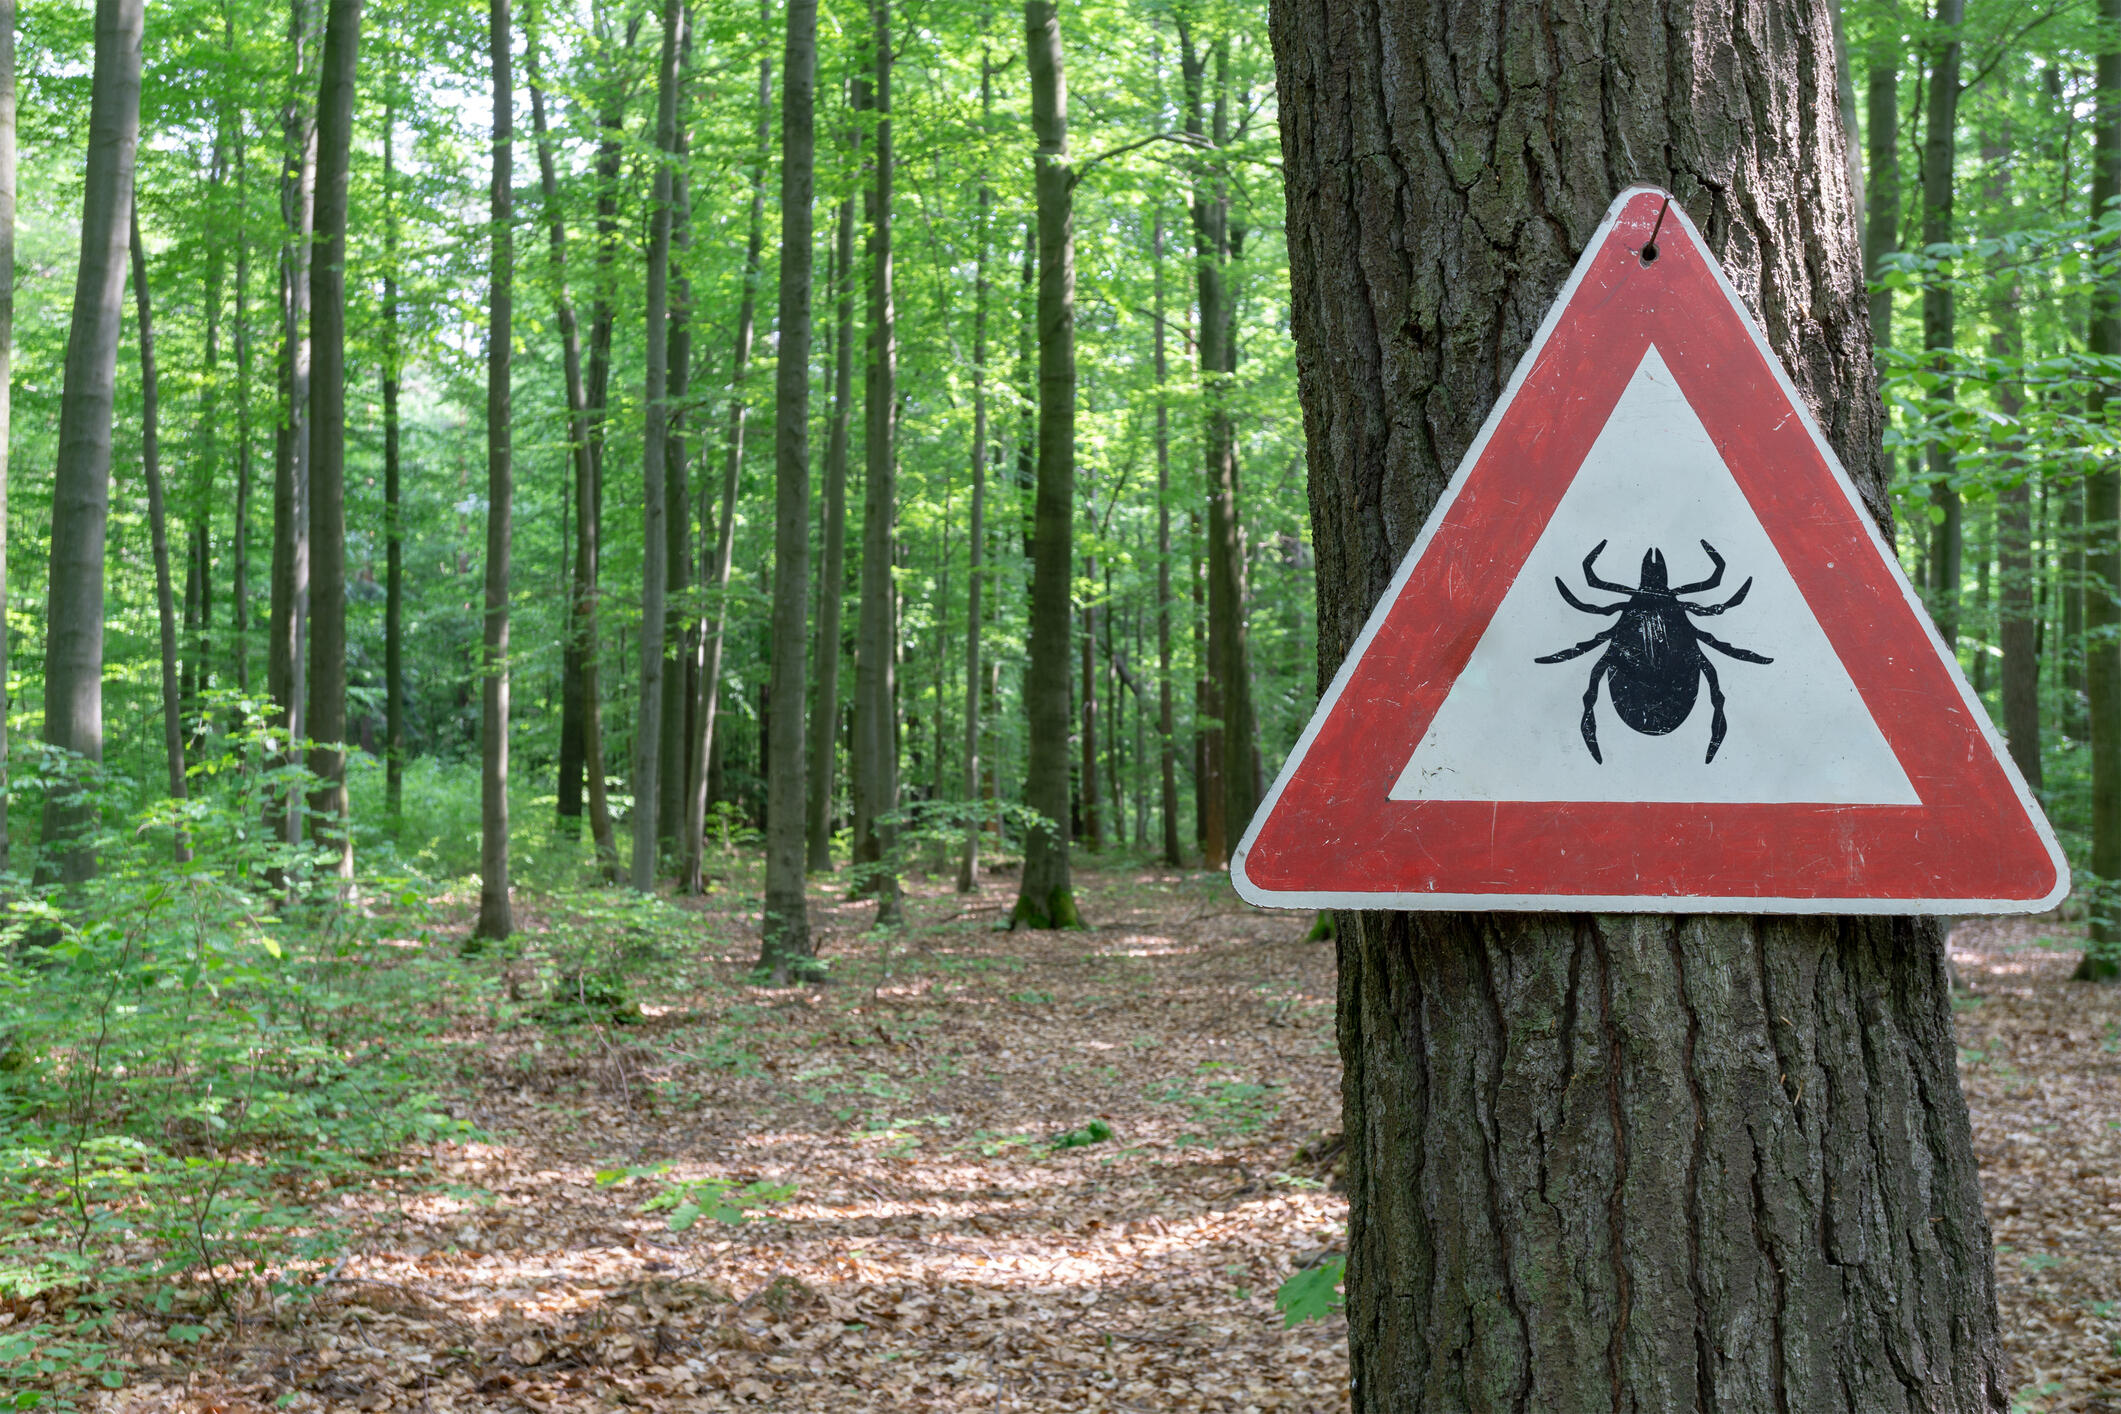 A warning sign indicating a tick presence in a forest hangs on a tree.